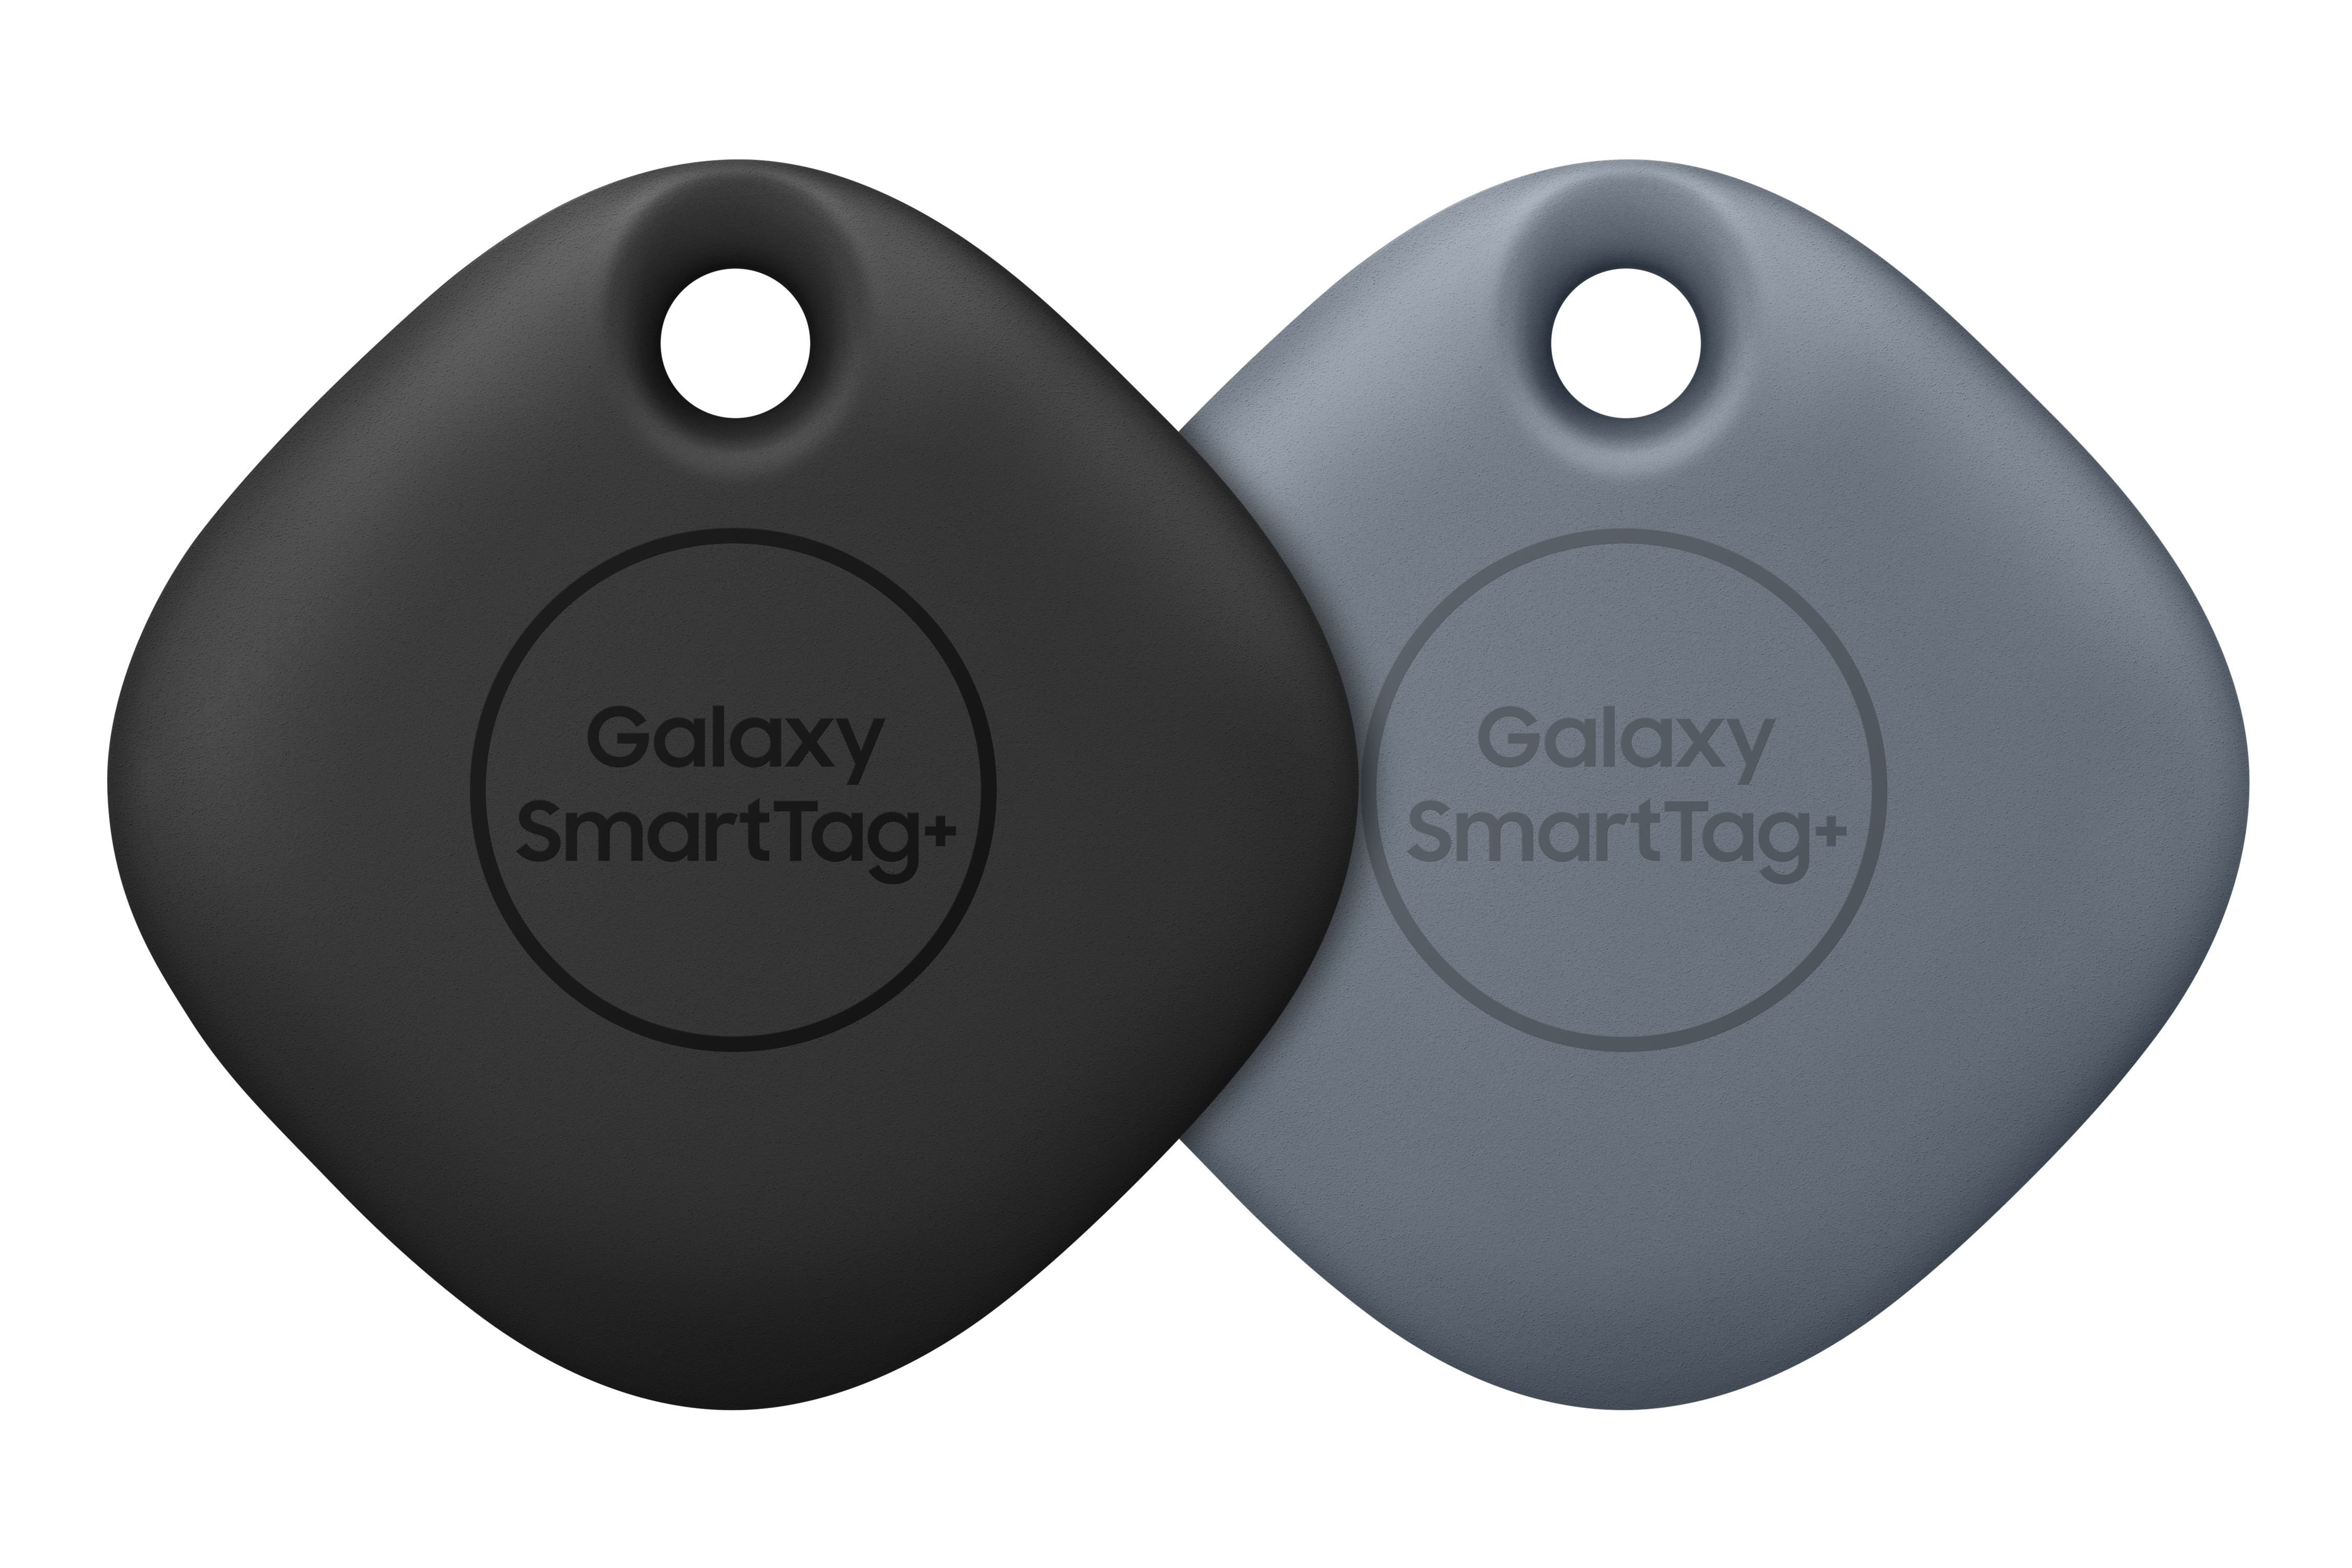 Samsung Galaxy SmartTag, Privacy & security guide